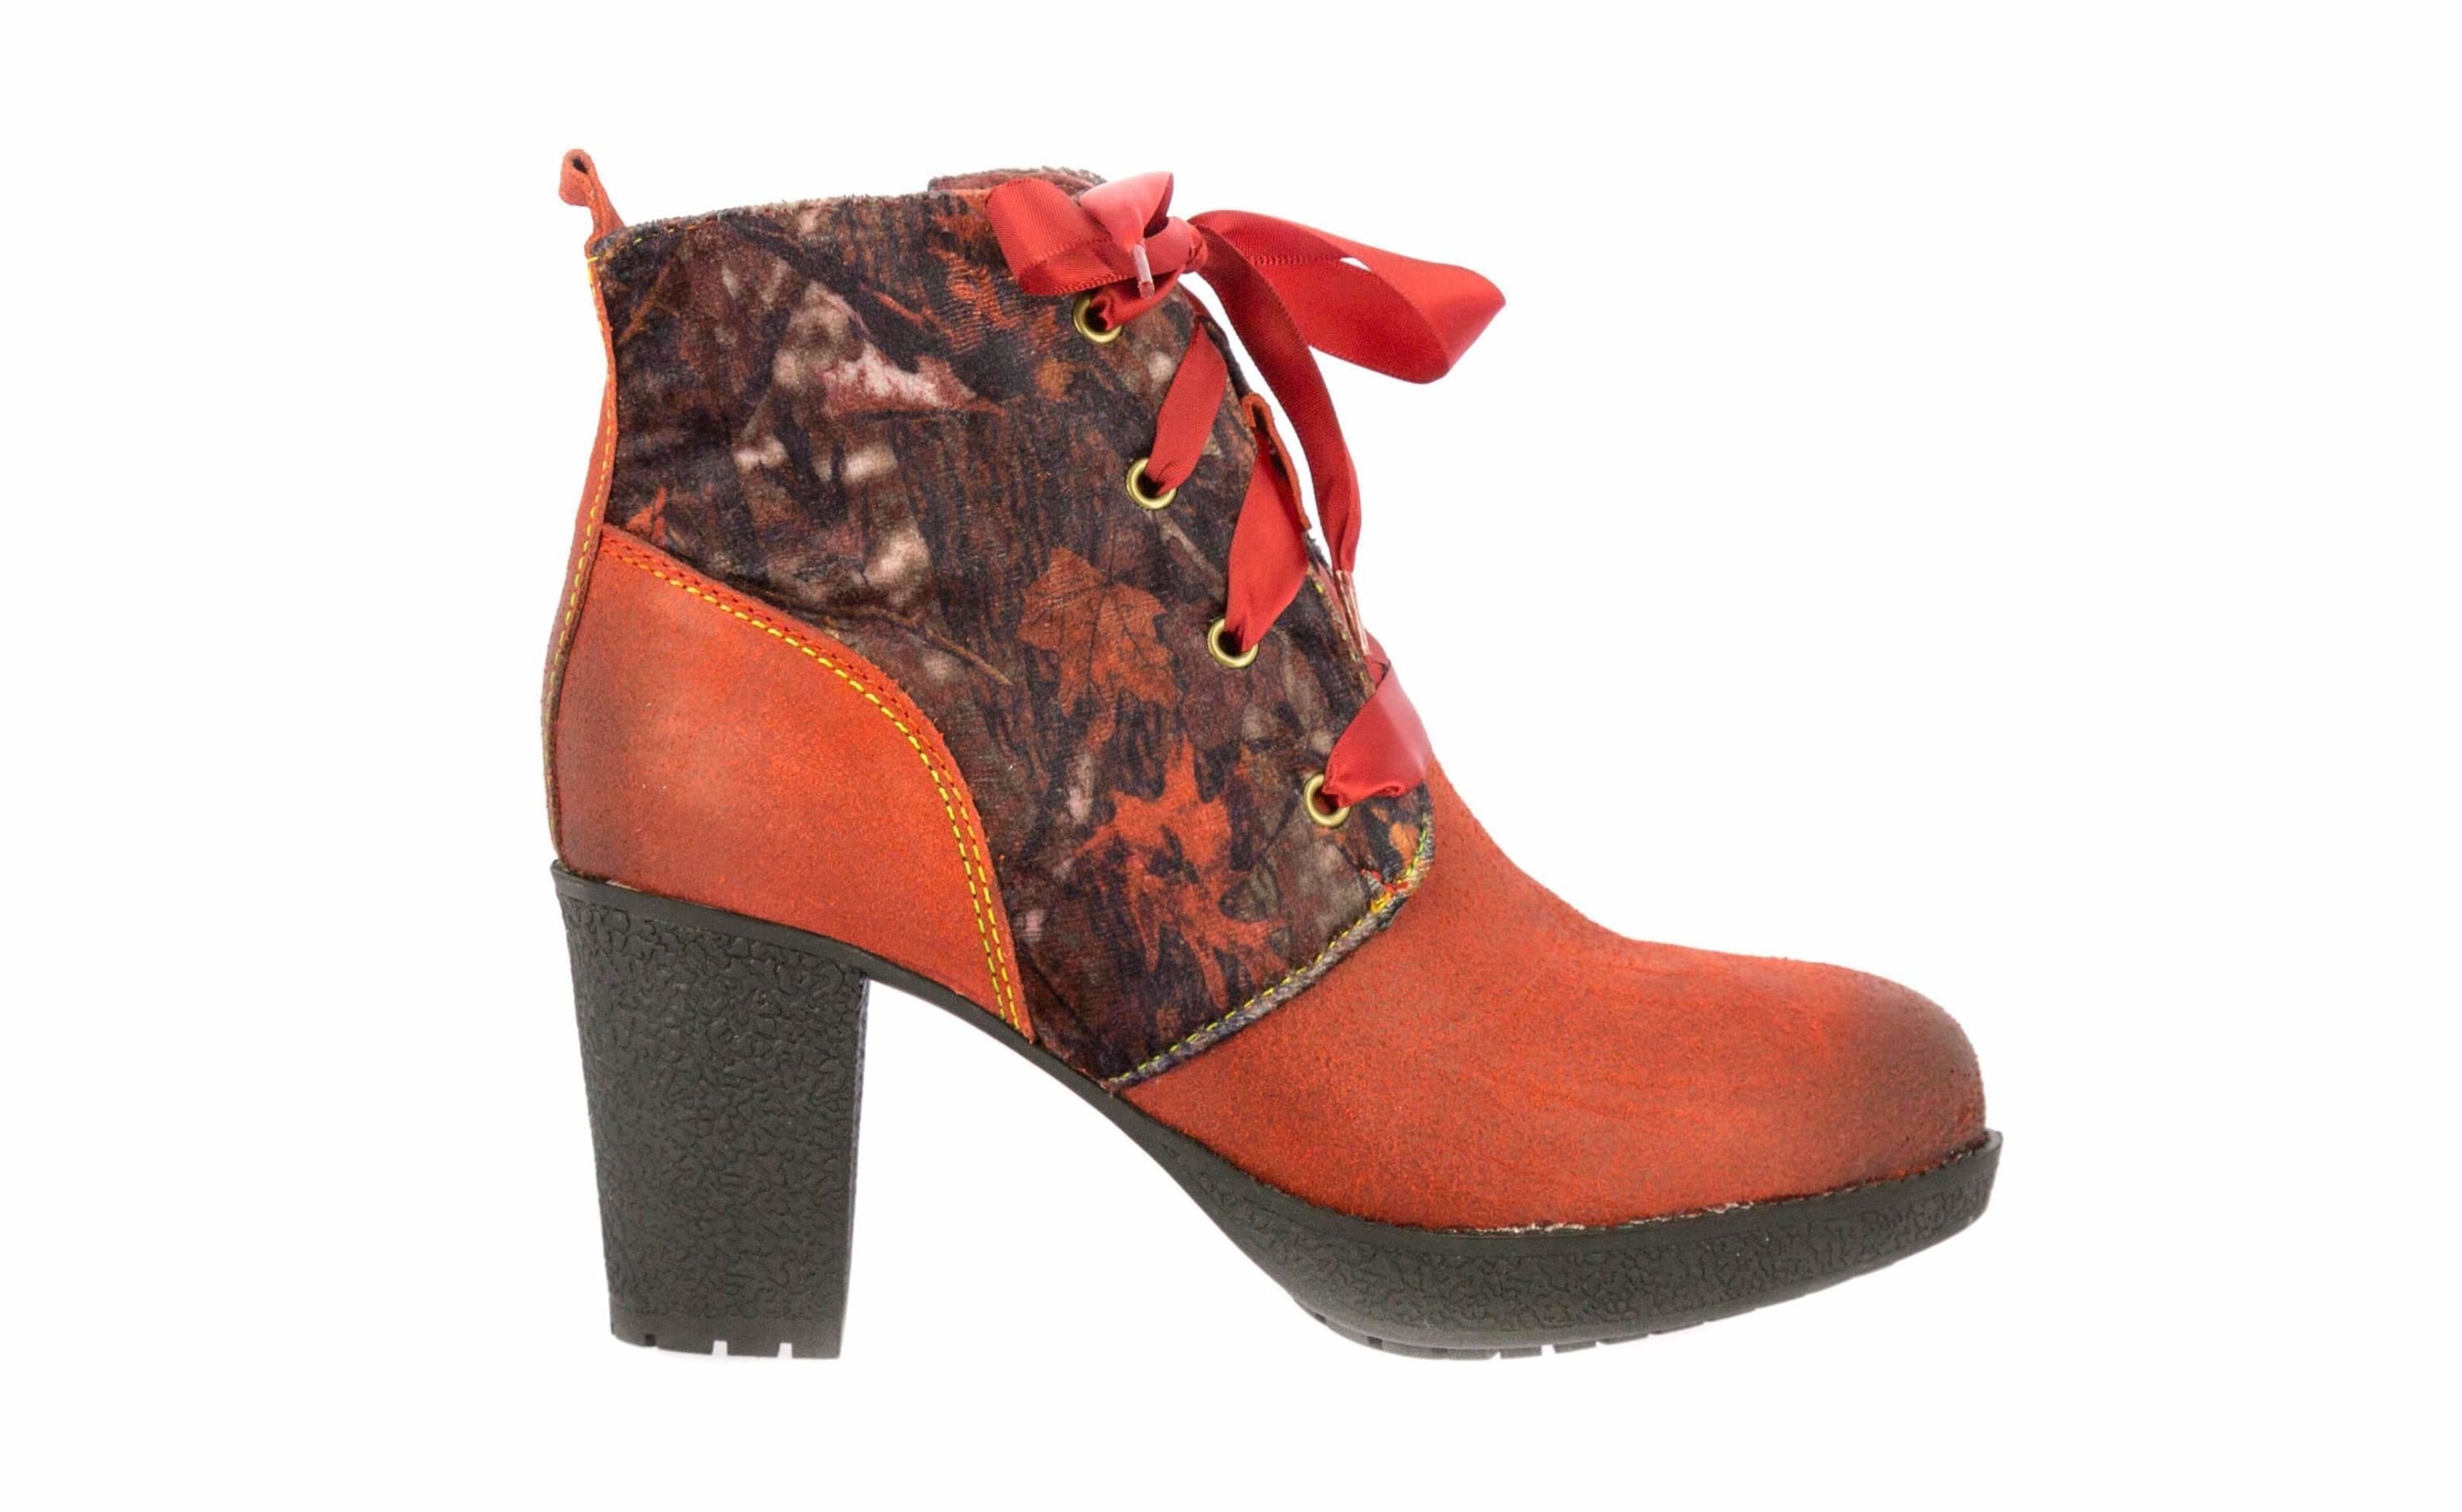 EDWIGE 11 - 35 / RED - Boot